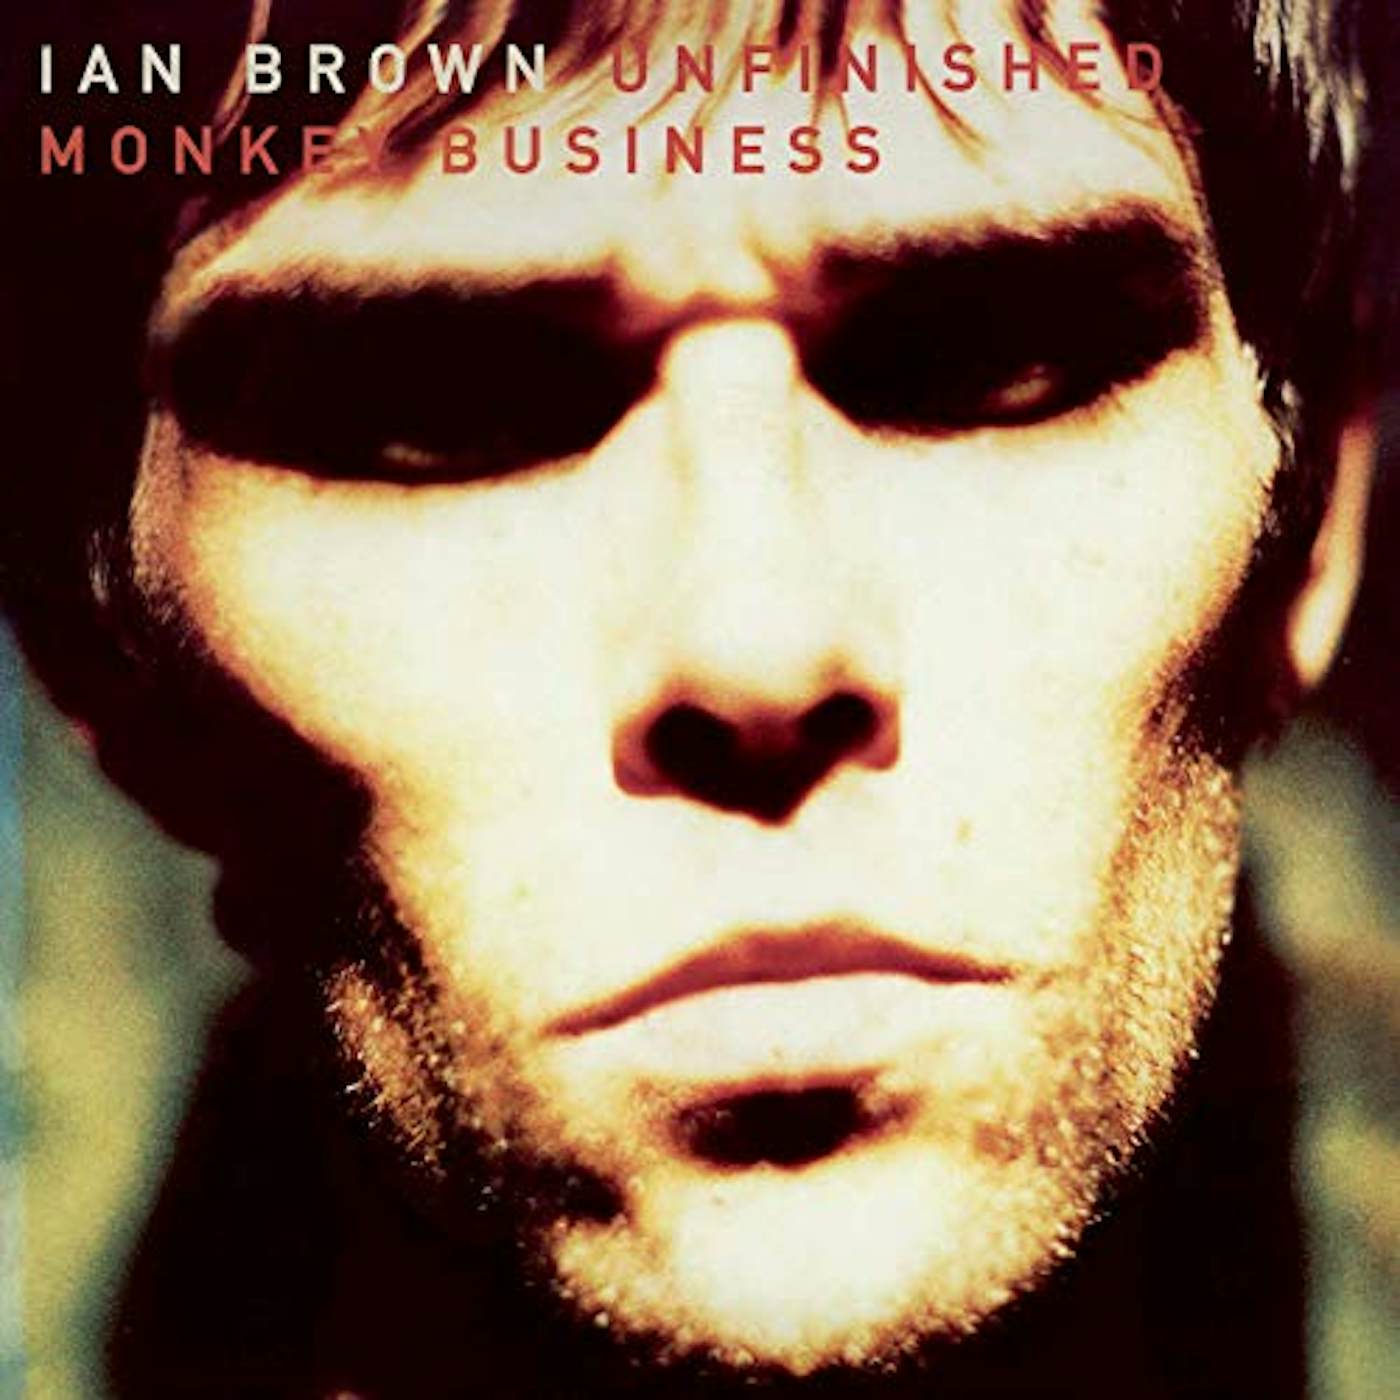 Ian Brown Unfinished Monkey Business Vinyl Record